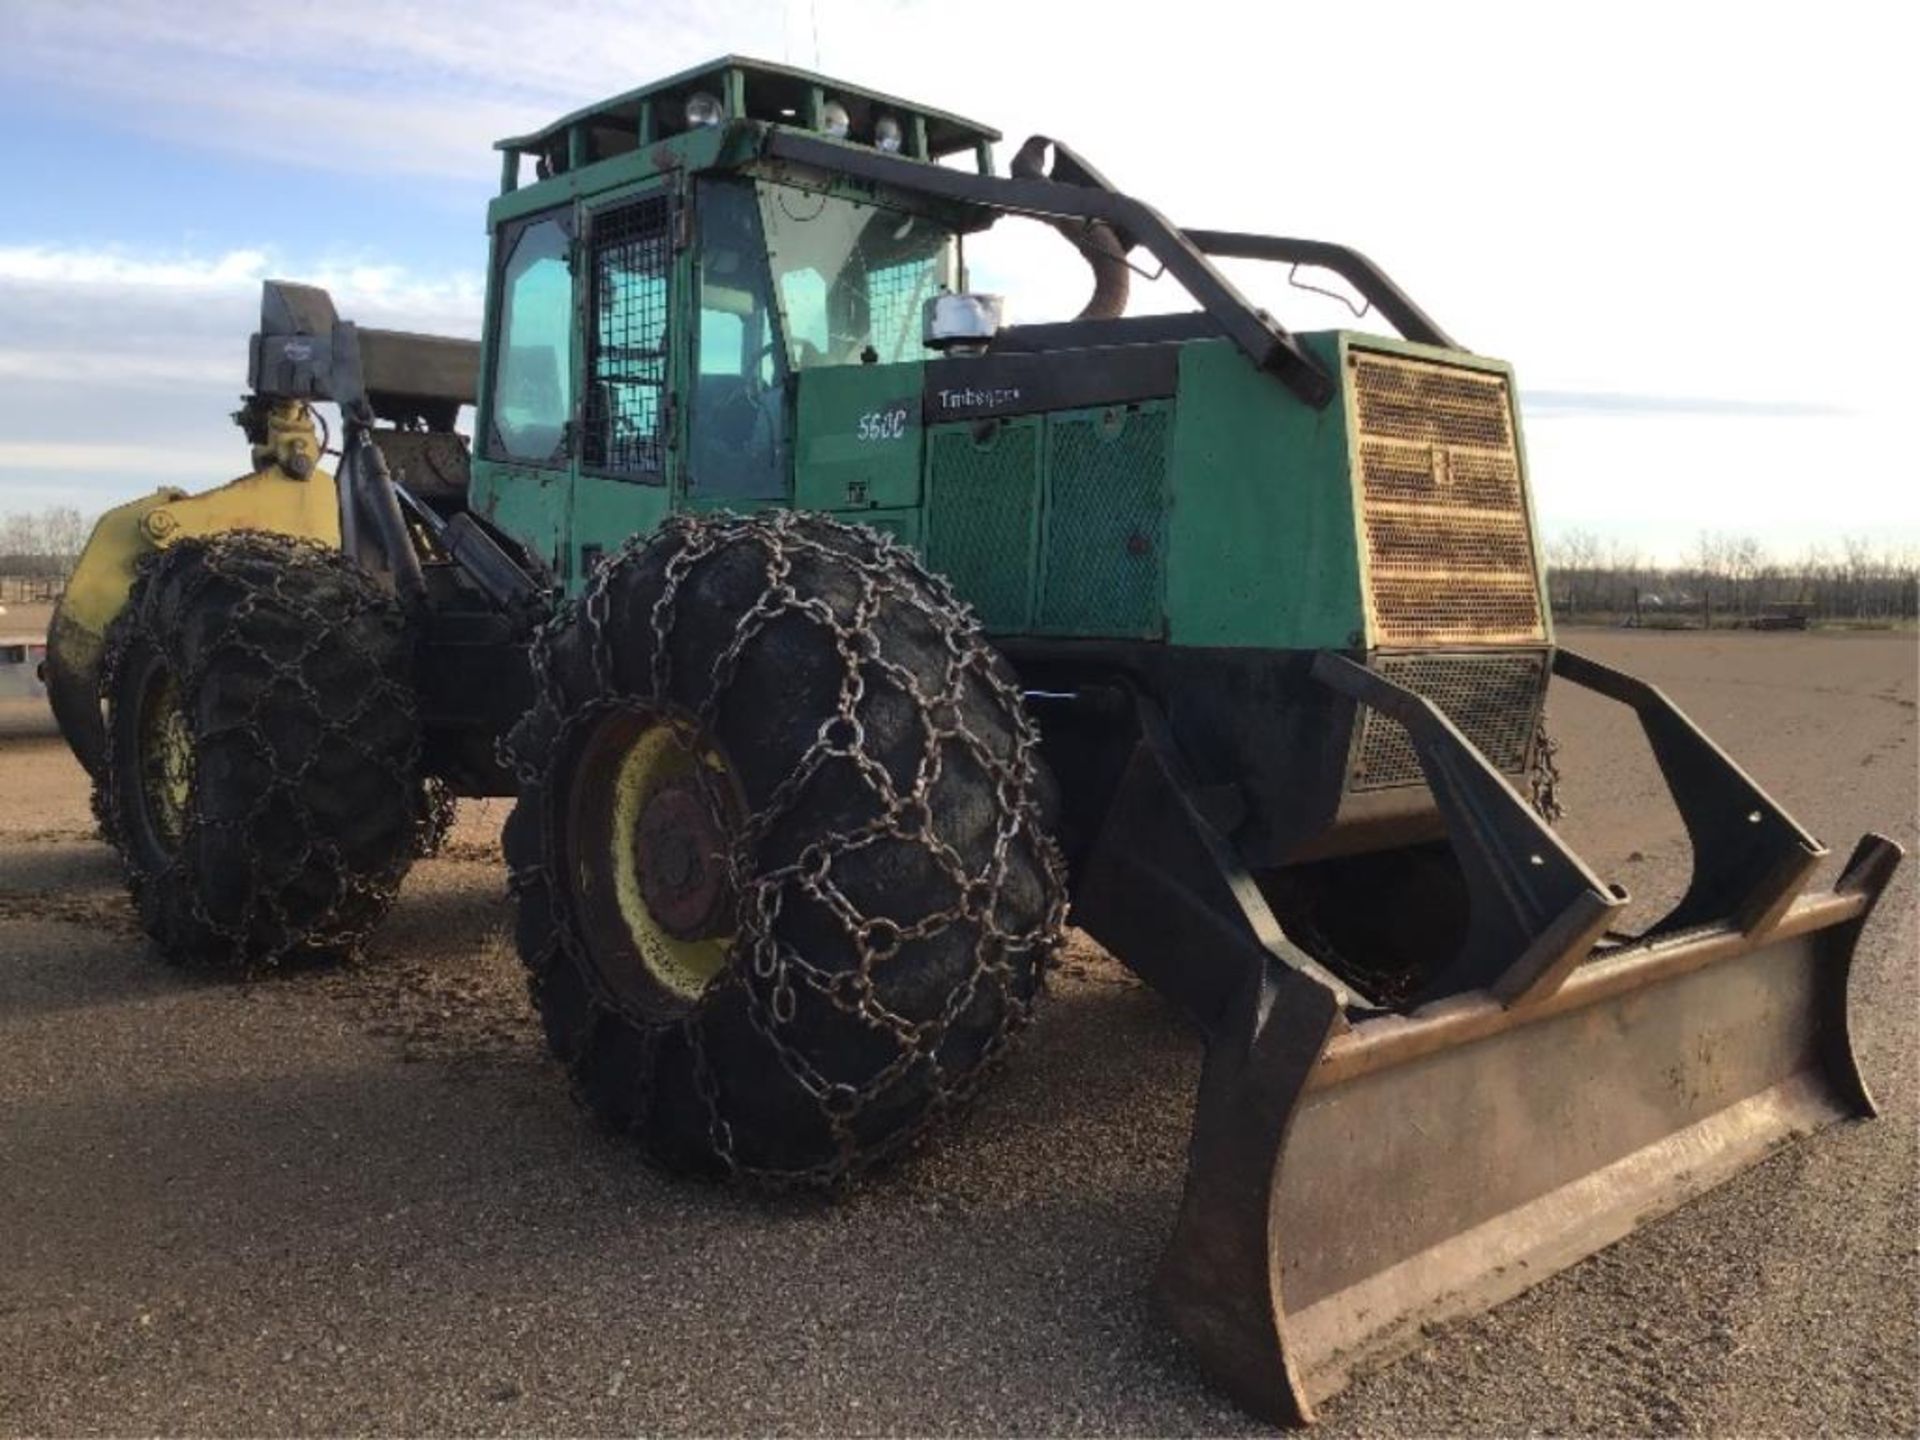 2000 Timberjack 560 Grapple Skidder s/n 10EC1155 5.9L Cummins Eng, 15281hrs, Tire Chains on all 4 - Image 3 of 18